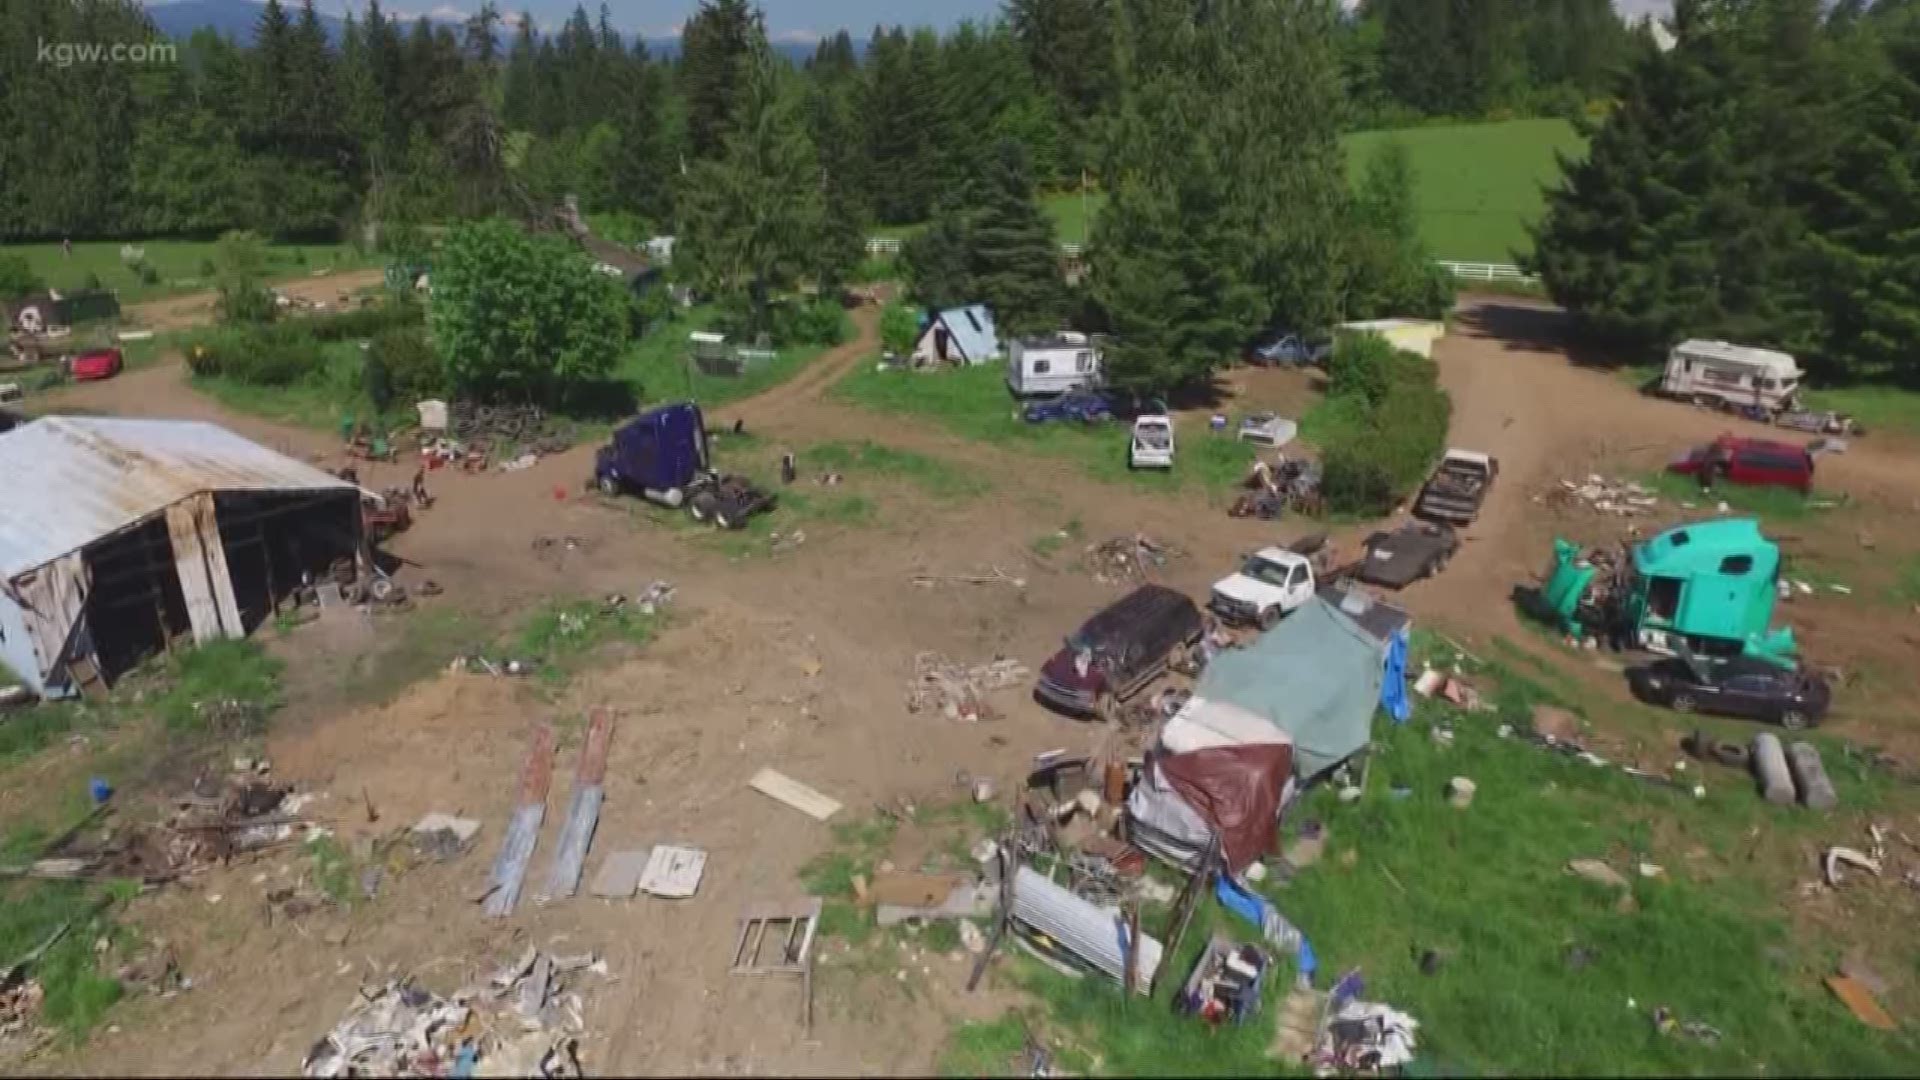 Squatters were evicted from a farm in Clackamas County.